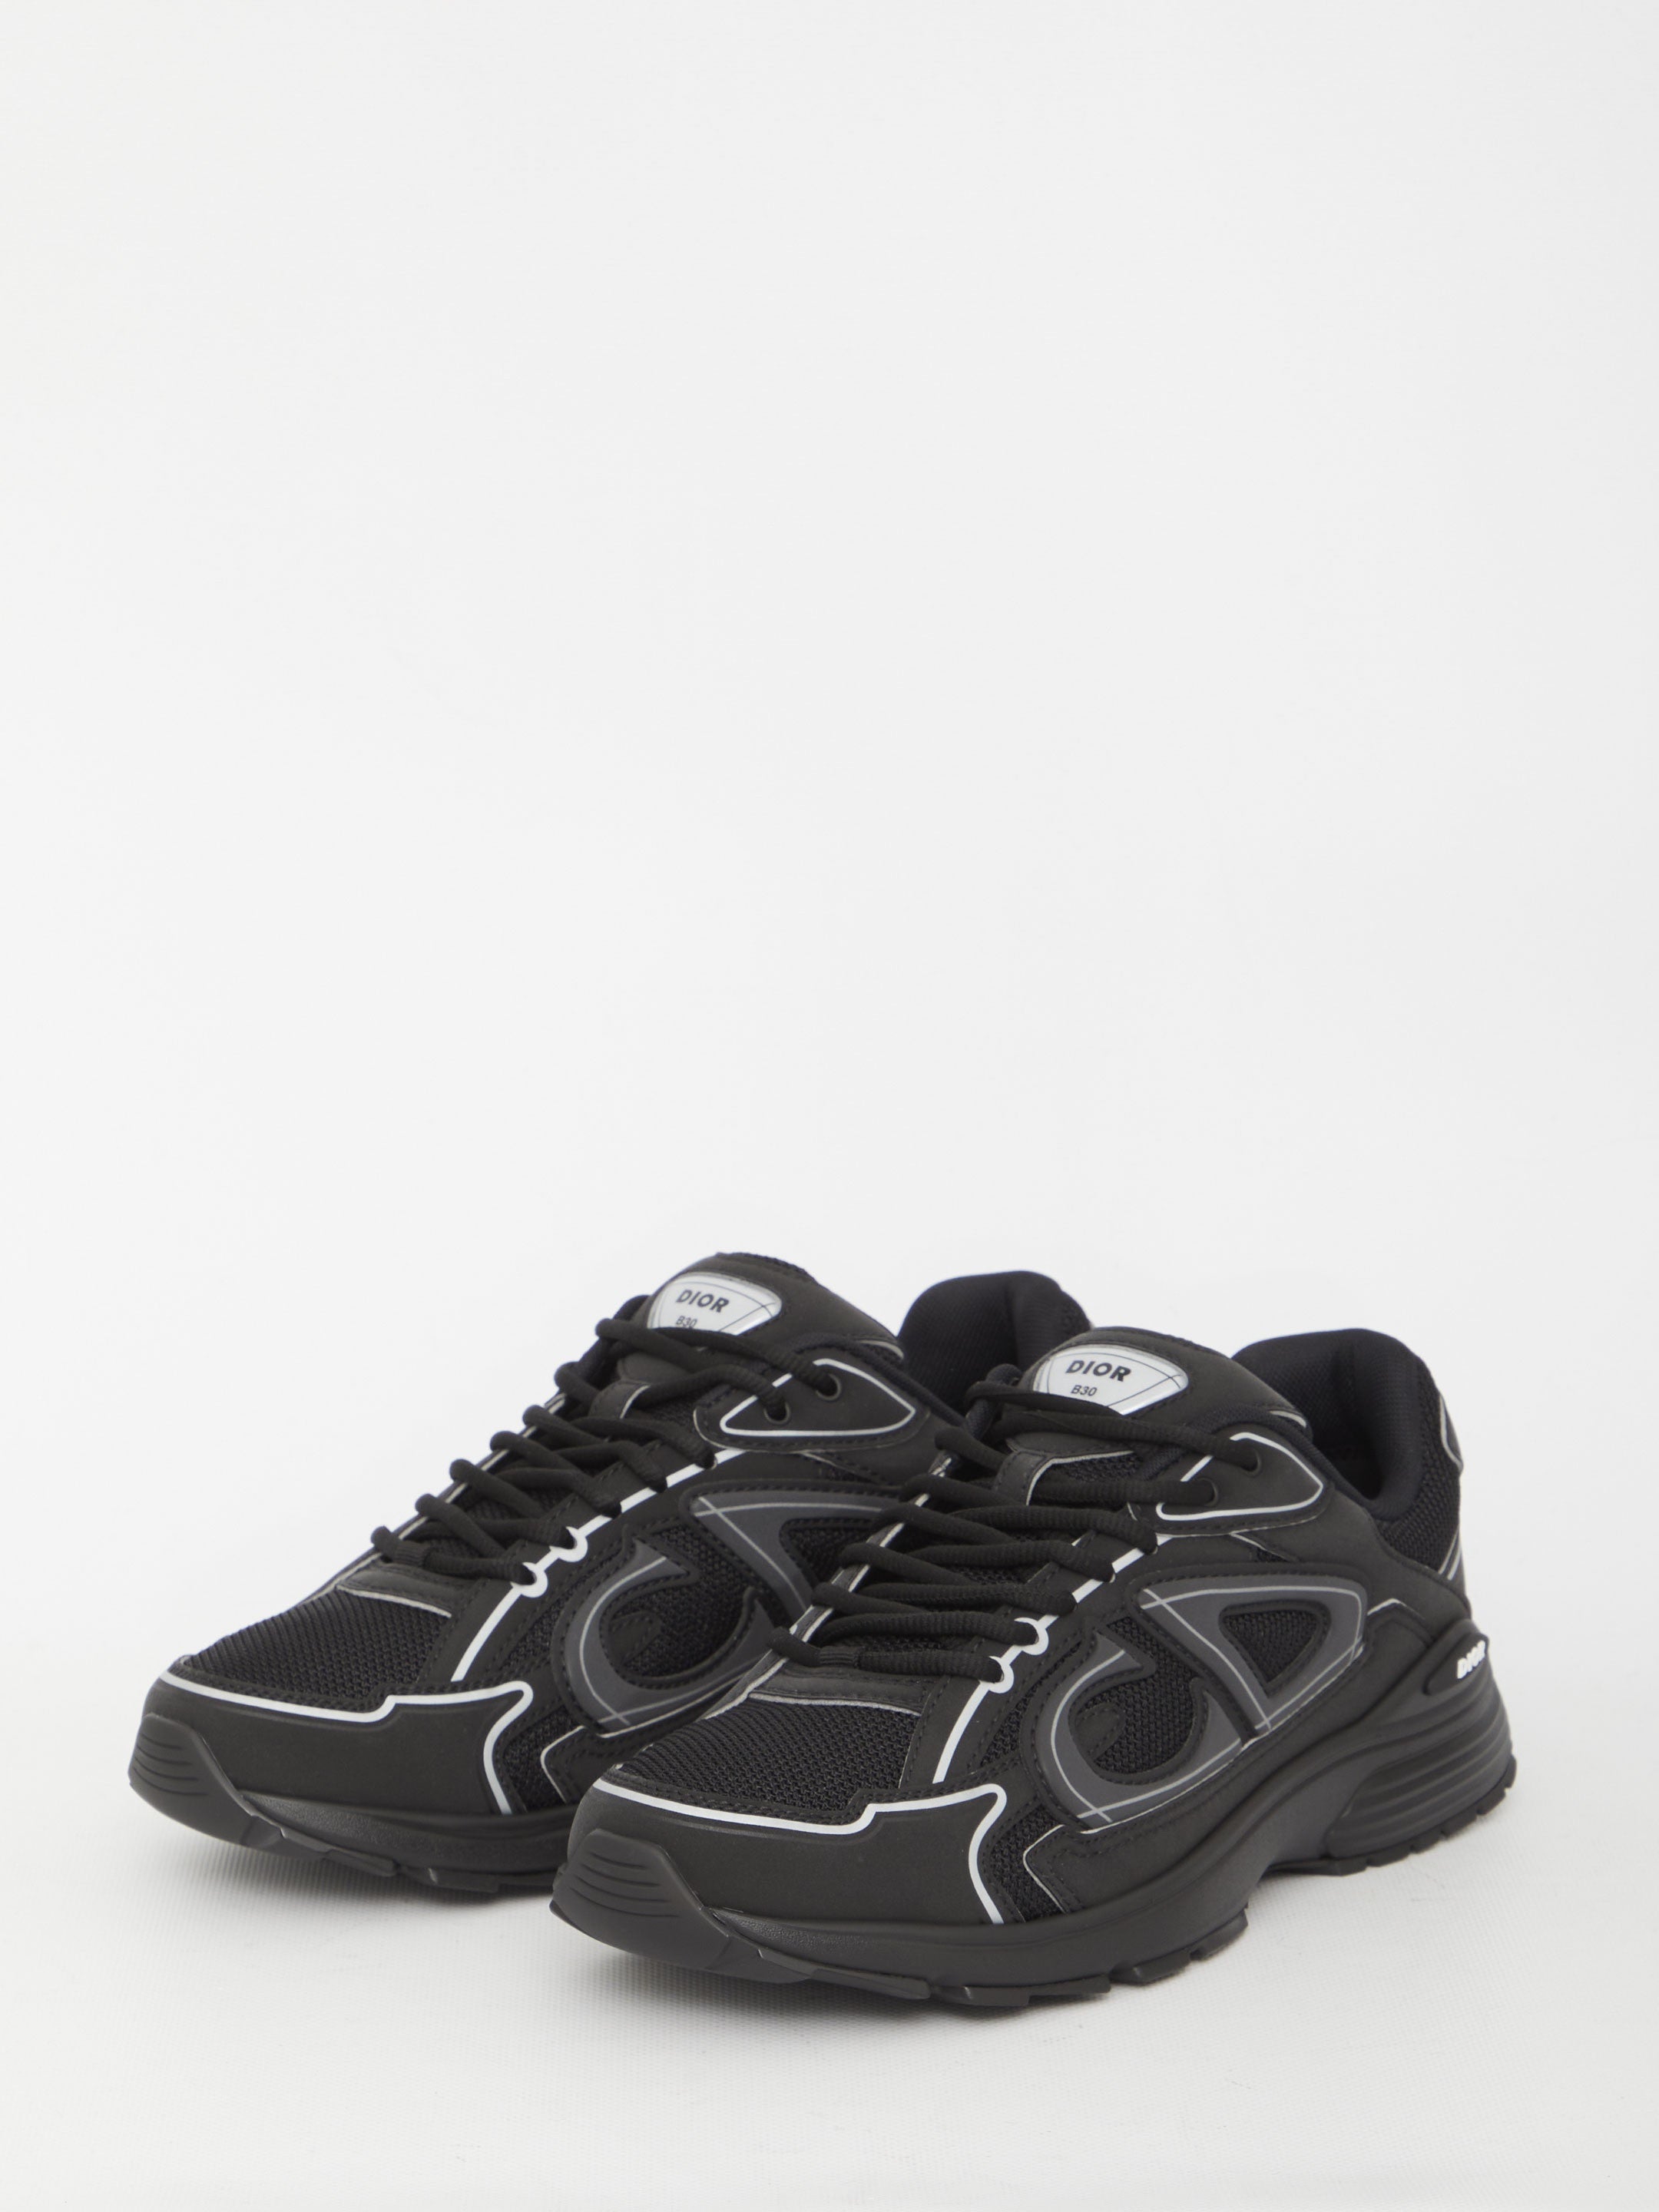 DIOR-HOMME-OUTLET-SALE-B30-sneakers-Sneakers-ARCHIVE-COLLECTION-2.jpg